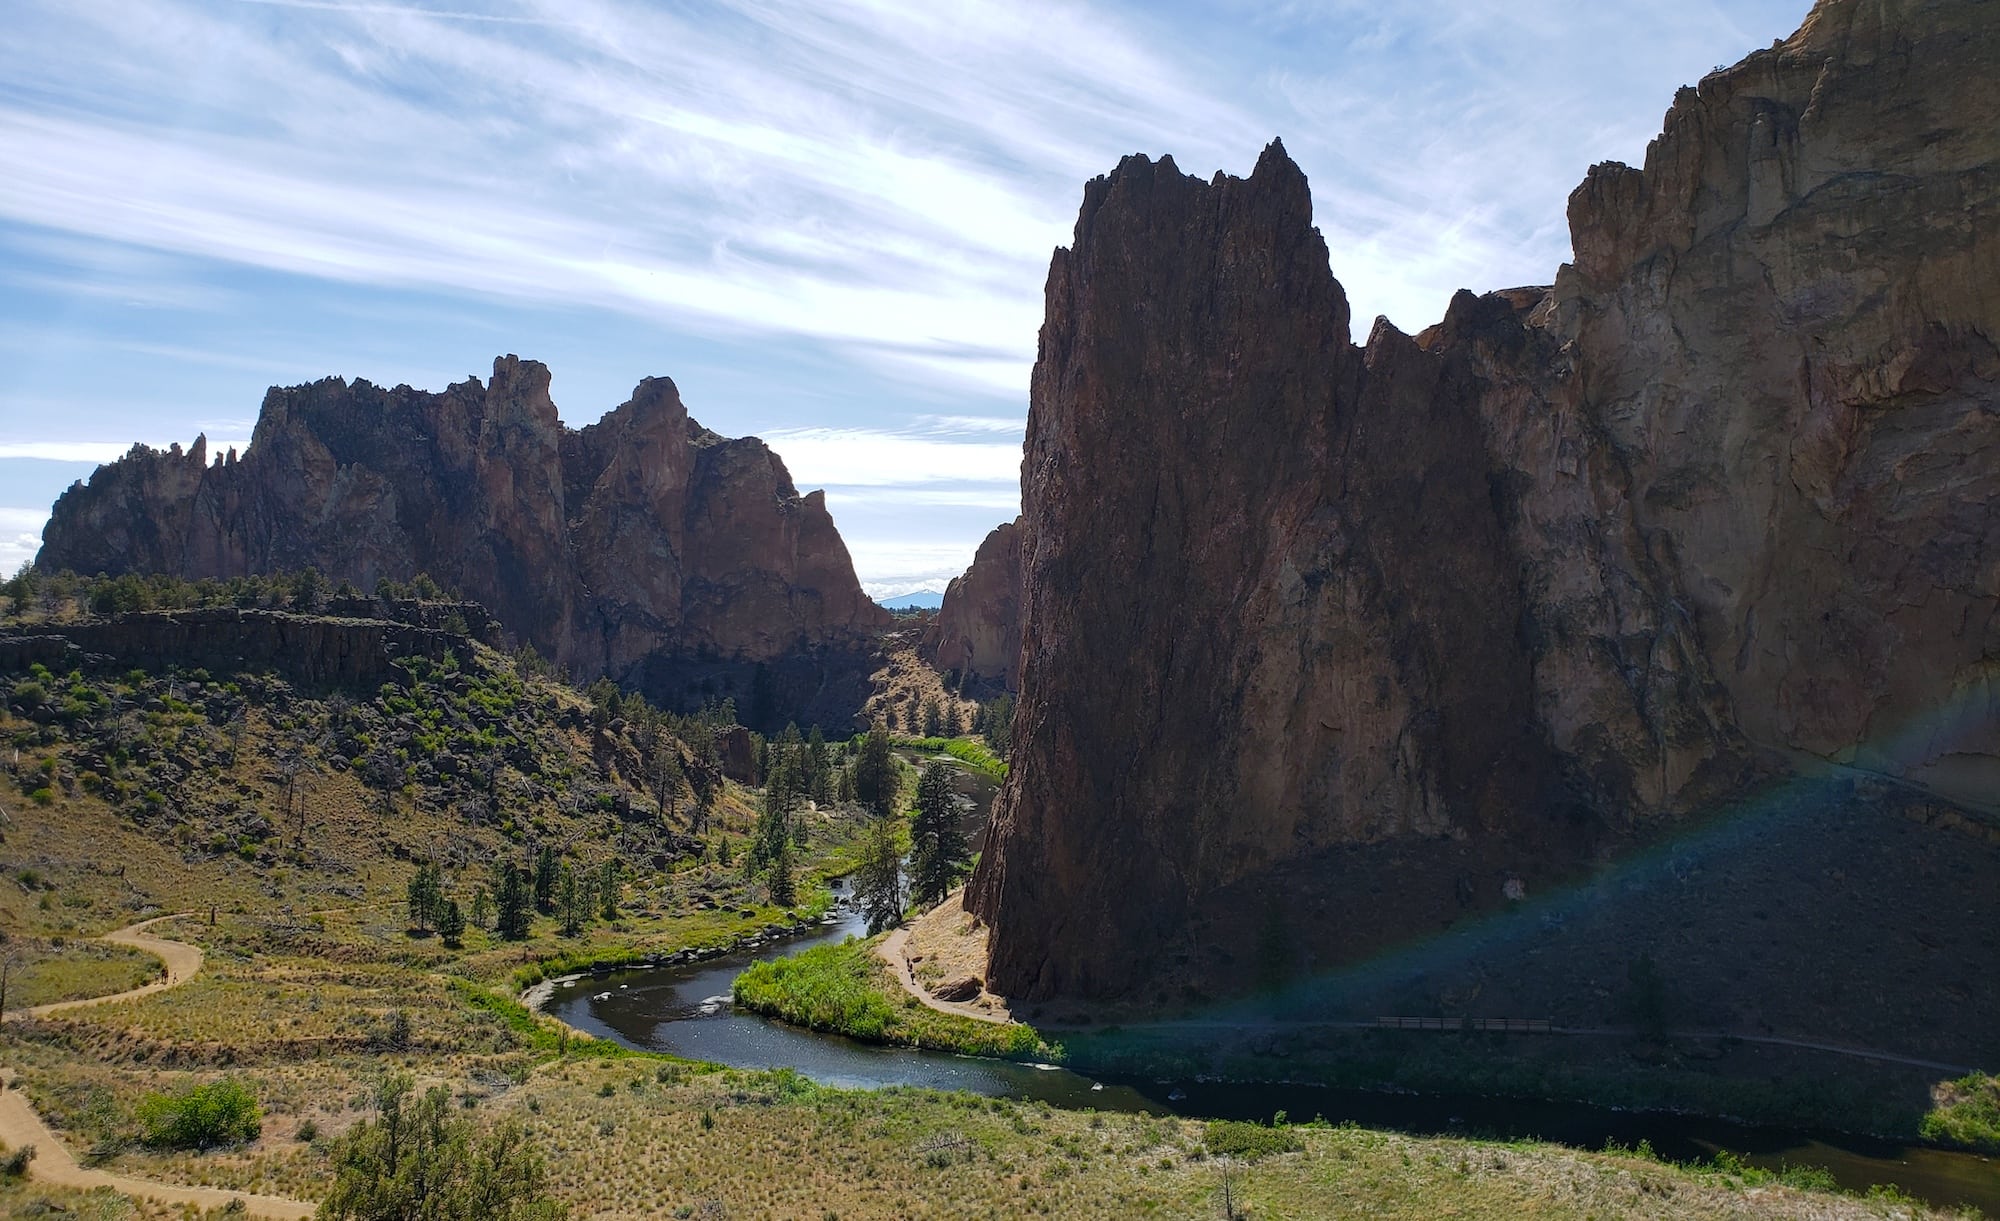 A sunny day at Smith Rock